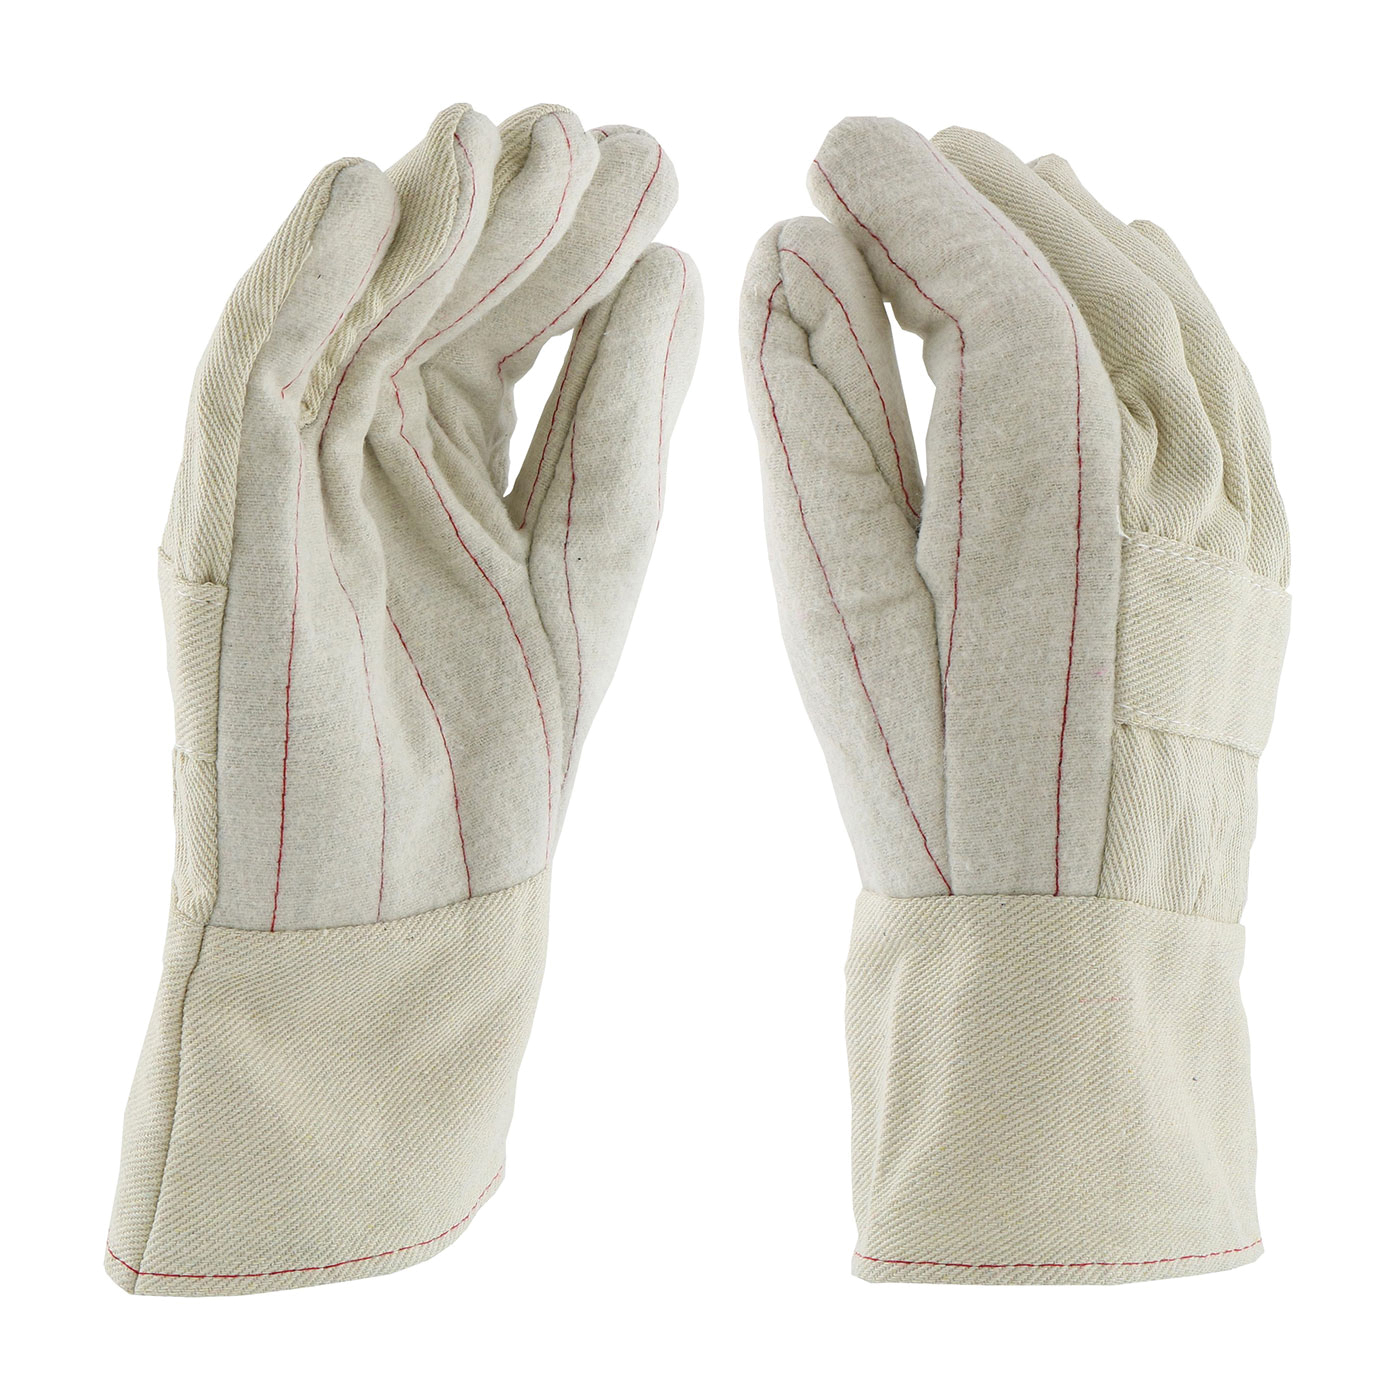 PIP® 7900K Regular Weight Standard Welding Gloves, L, Cotton, Off-White, Cotton Lining, Band Top Cuff, 10-3/4 in L, Resists: Abrasion, Heat and Wear